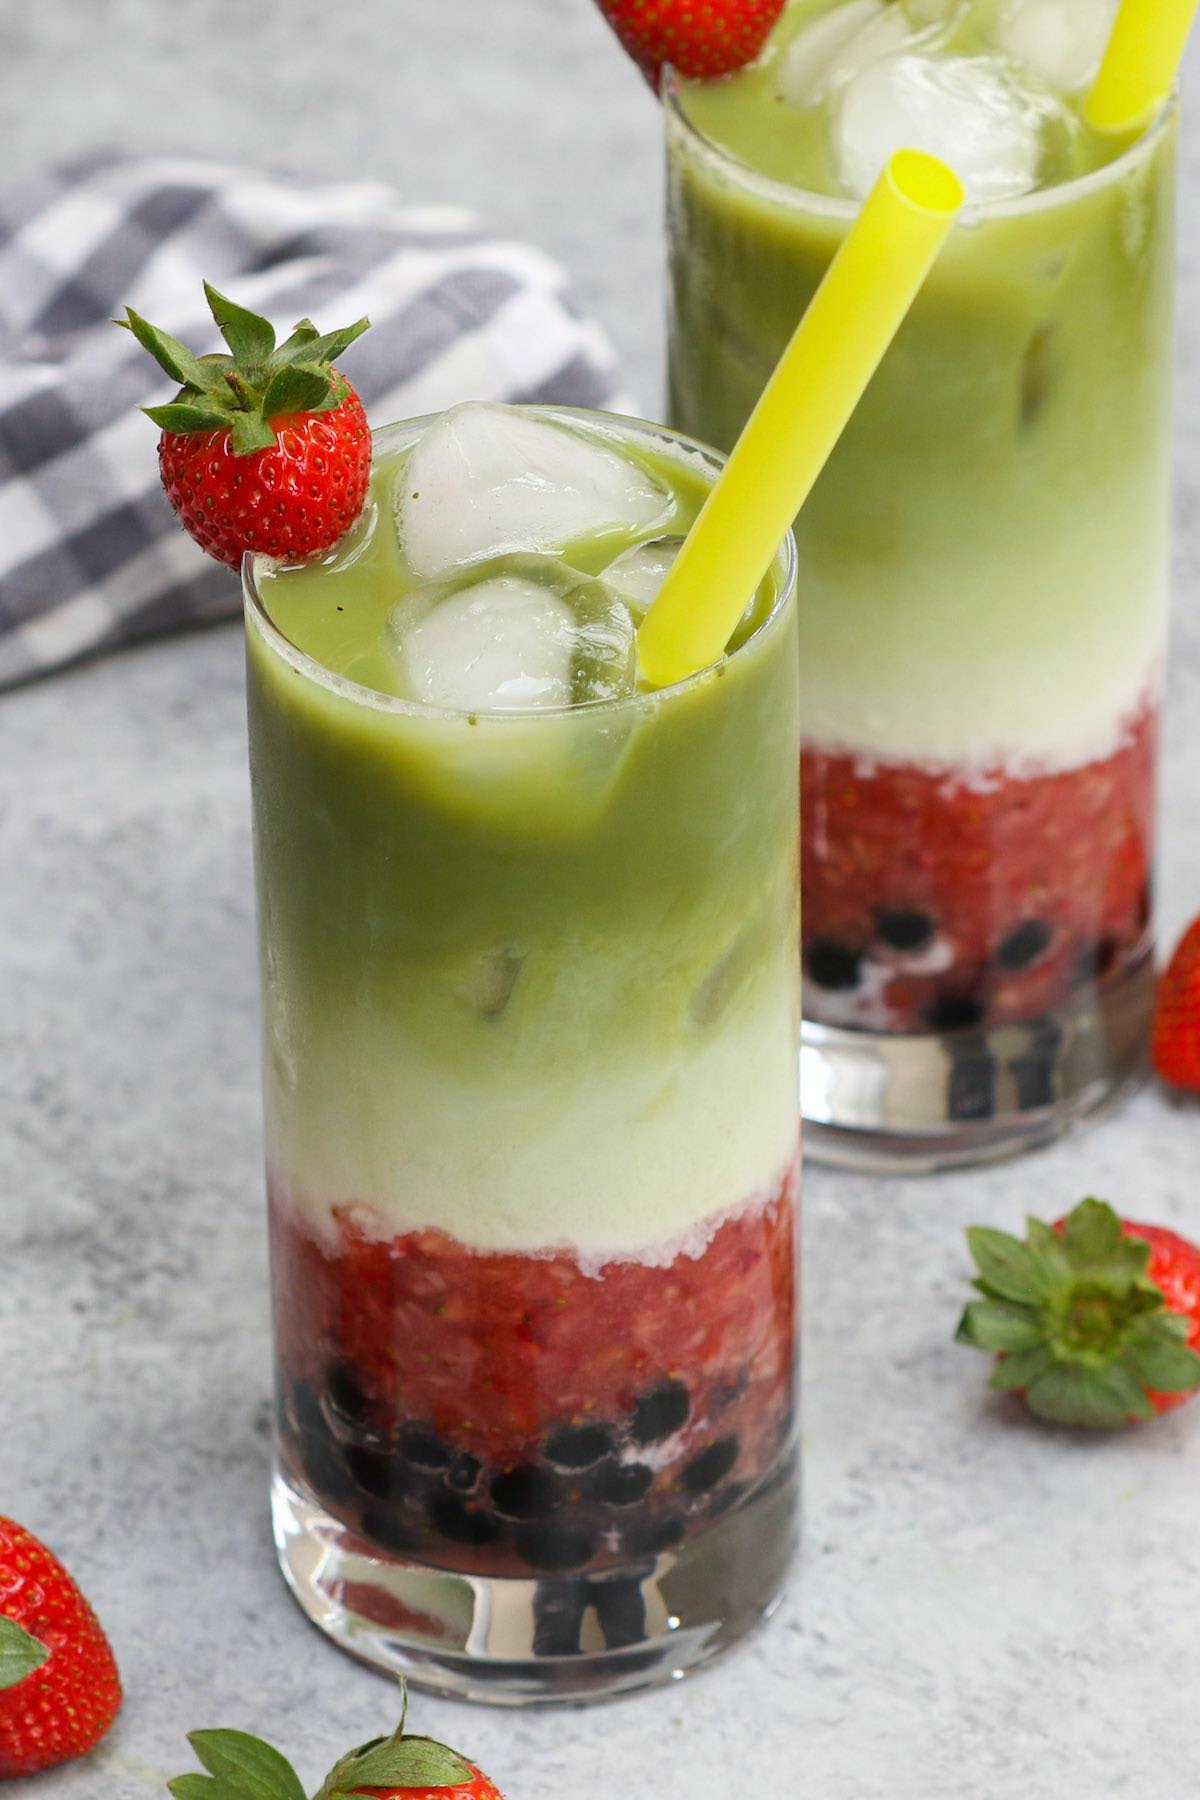 Ever wondered how to make Boba Guys’ insta-worthy layered Strawberry Matcha Latte? Here is an easy and simple bubble tea strawberry matcha latte recipe that shows how to make this creamy iced drink at home! It’s creamy, refreshing, and loaded with soft and chewy boba milk tea pearls. #StrawberryMatchaLatte #BobaStrawberryMatcha